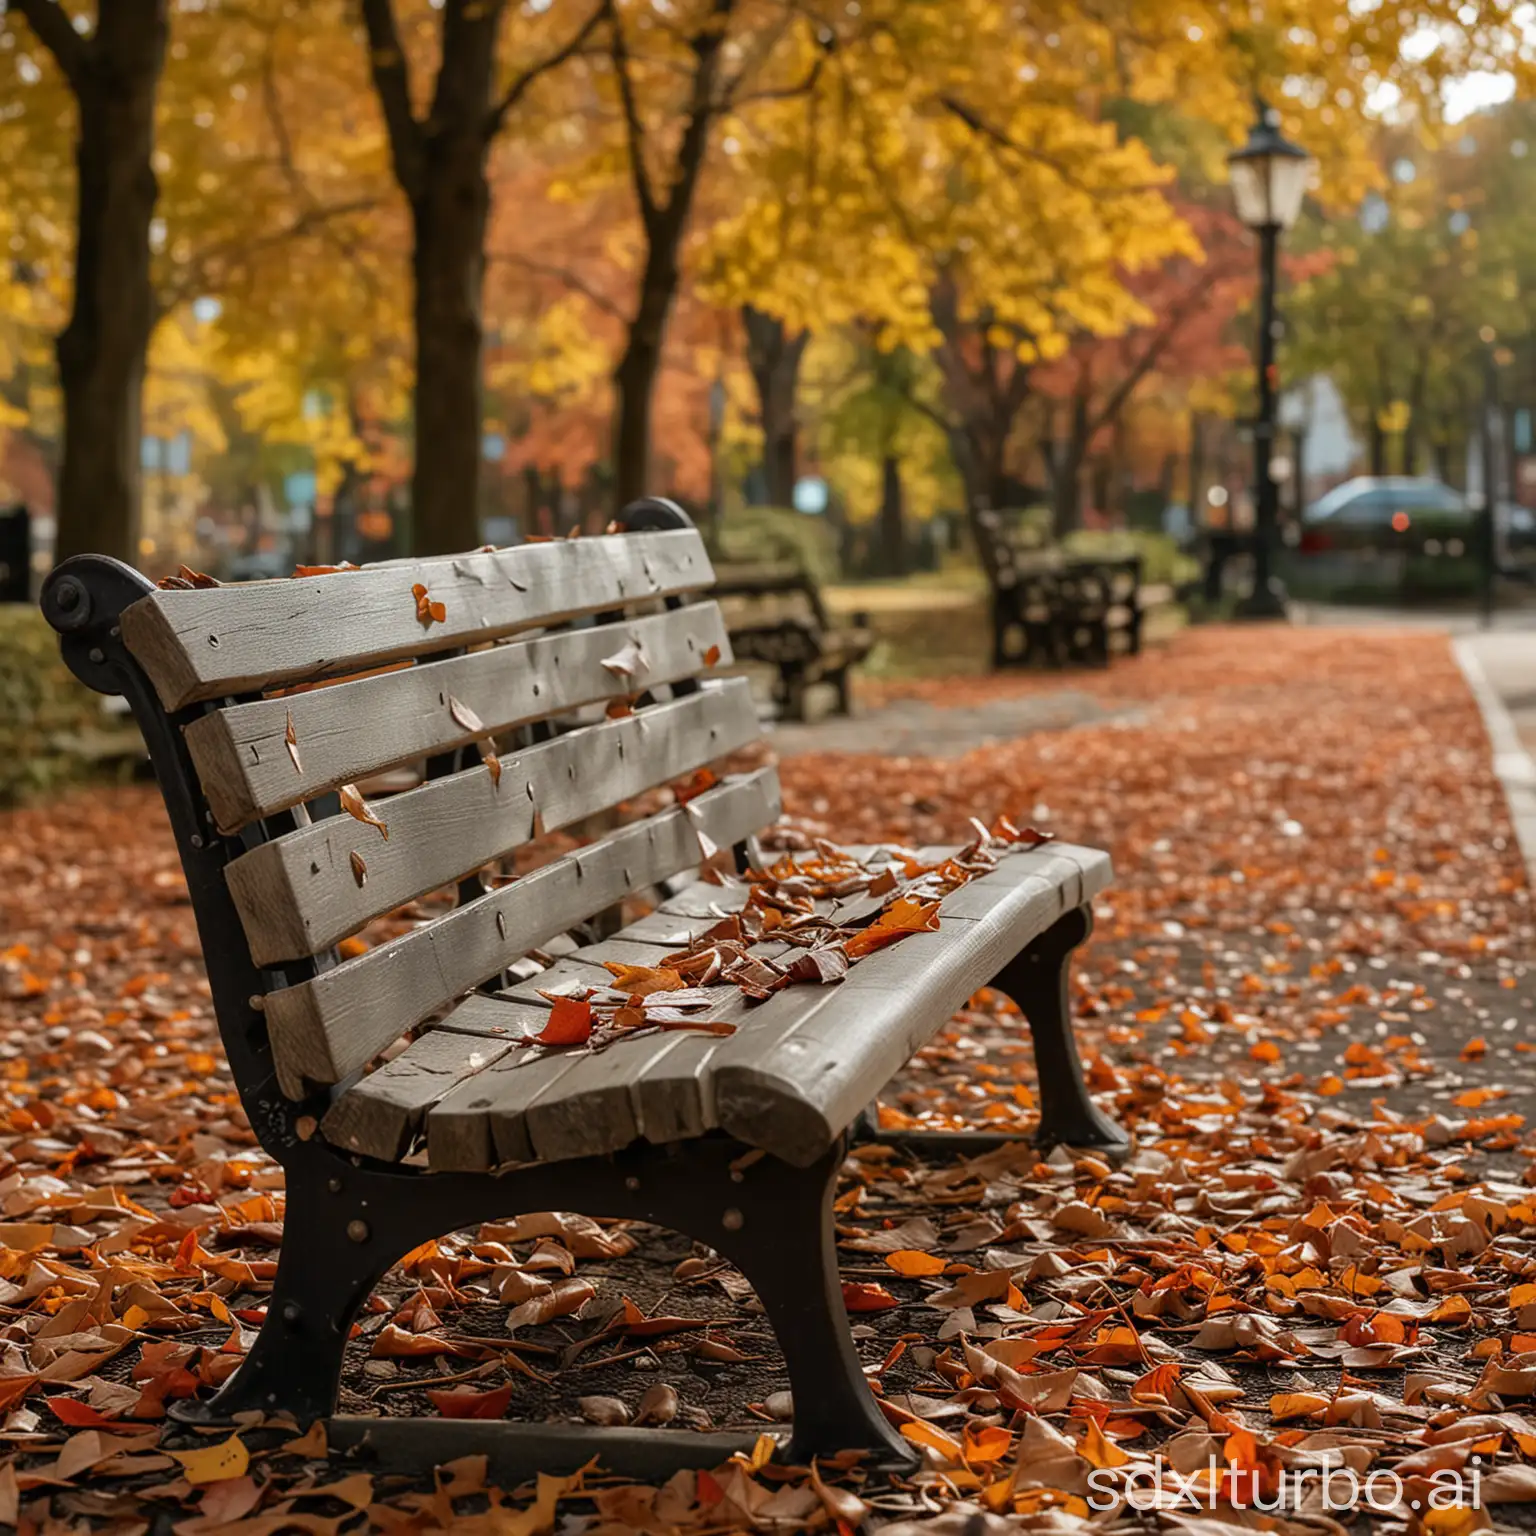 Photograph of a park bench, Fujifilm GFX 100, 100mm macro lens, natural light, autumn leaves around, focus on bench and seasonal colors, hyperrealistic and warm, --ar 1:1